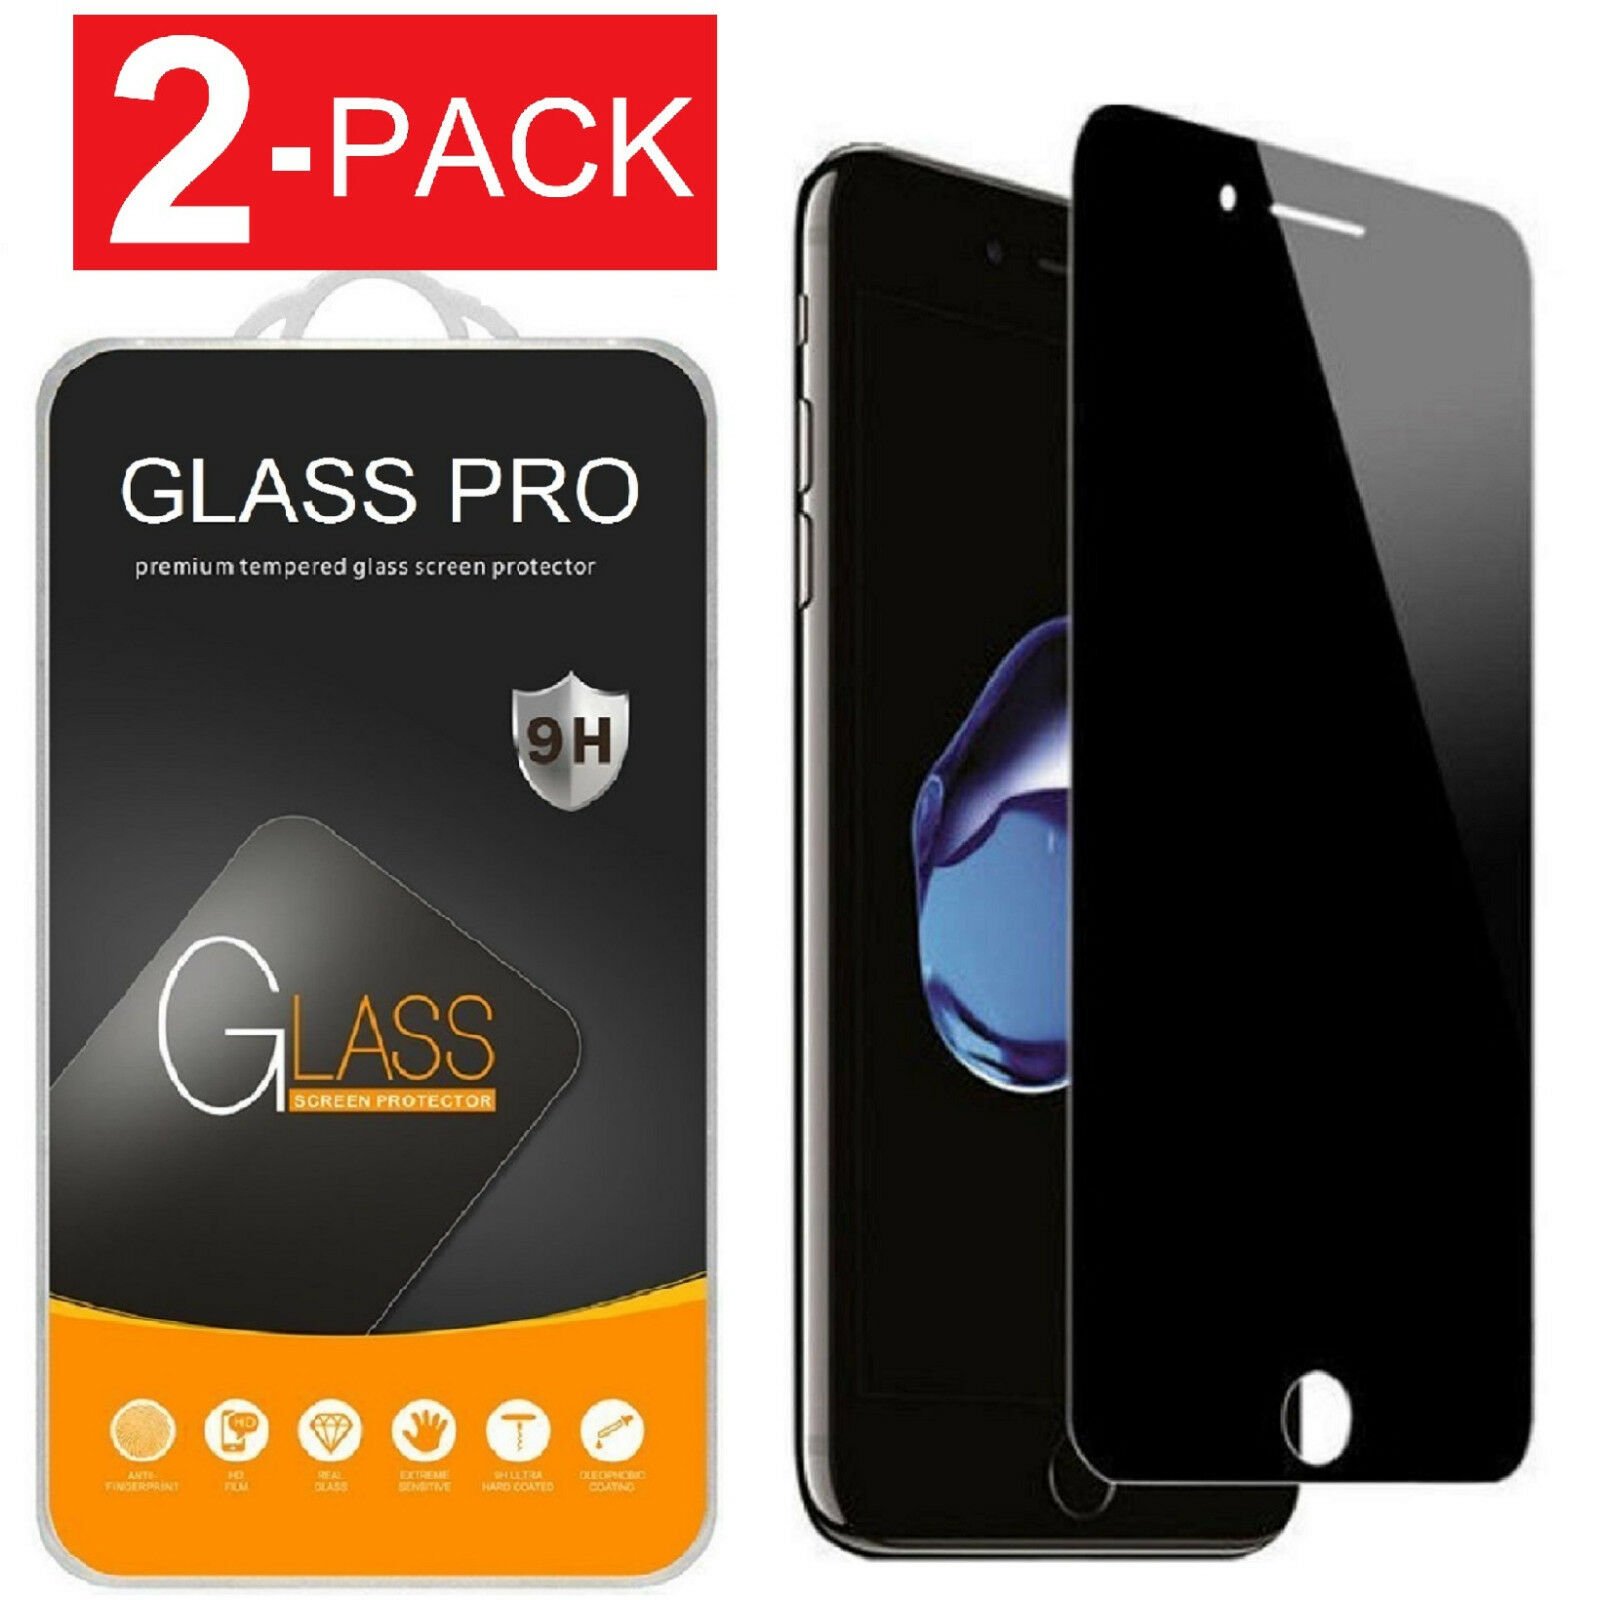 9H Privacy Anti-Spy Tempered Glass Screen Protector for iPhone X 6 7 8 Plus  | eBay